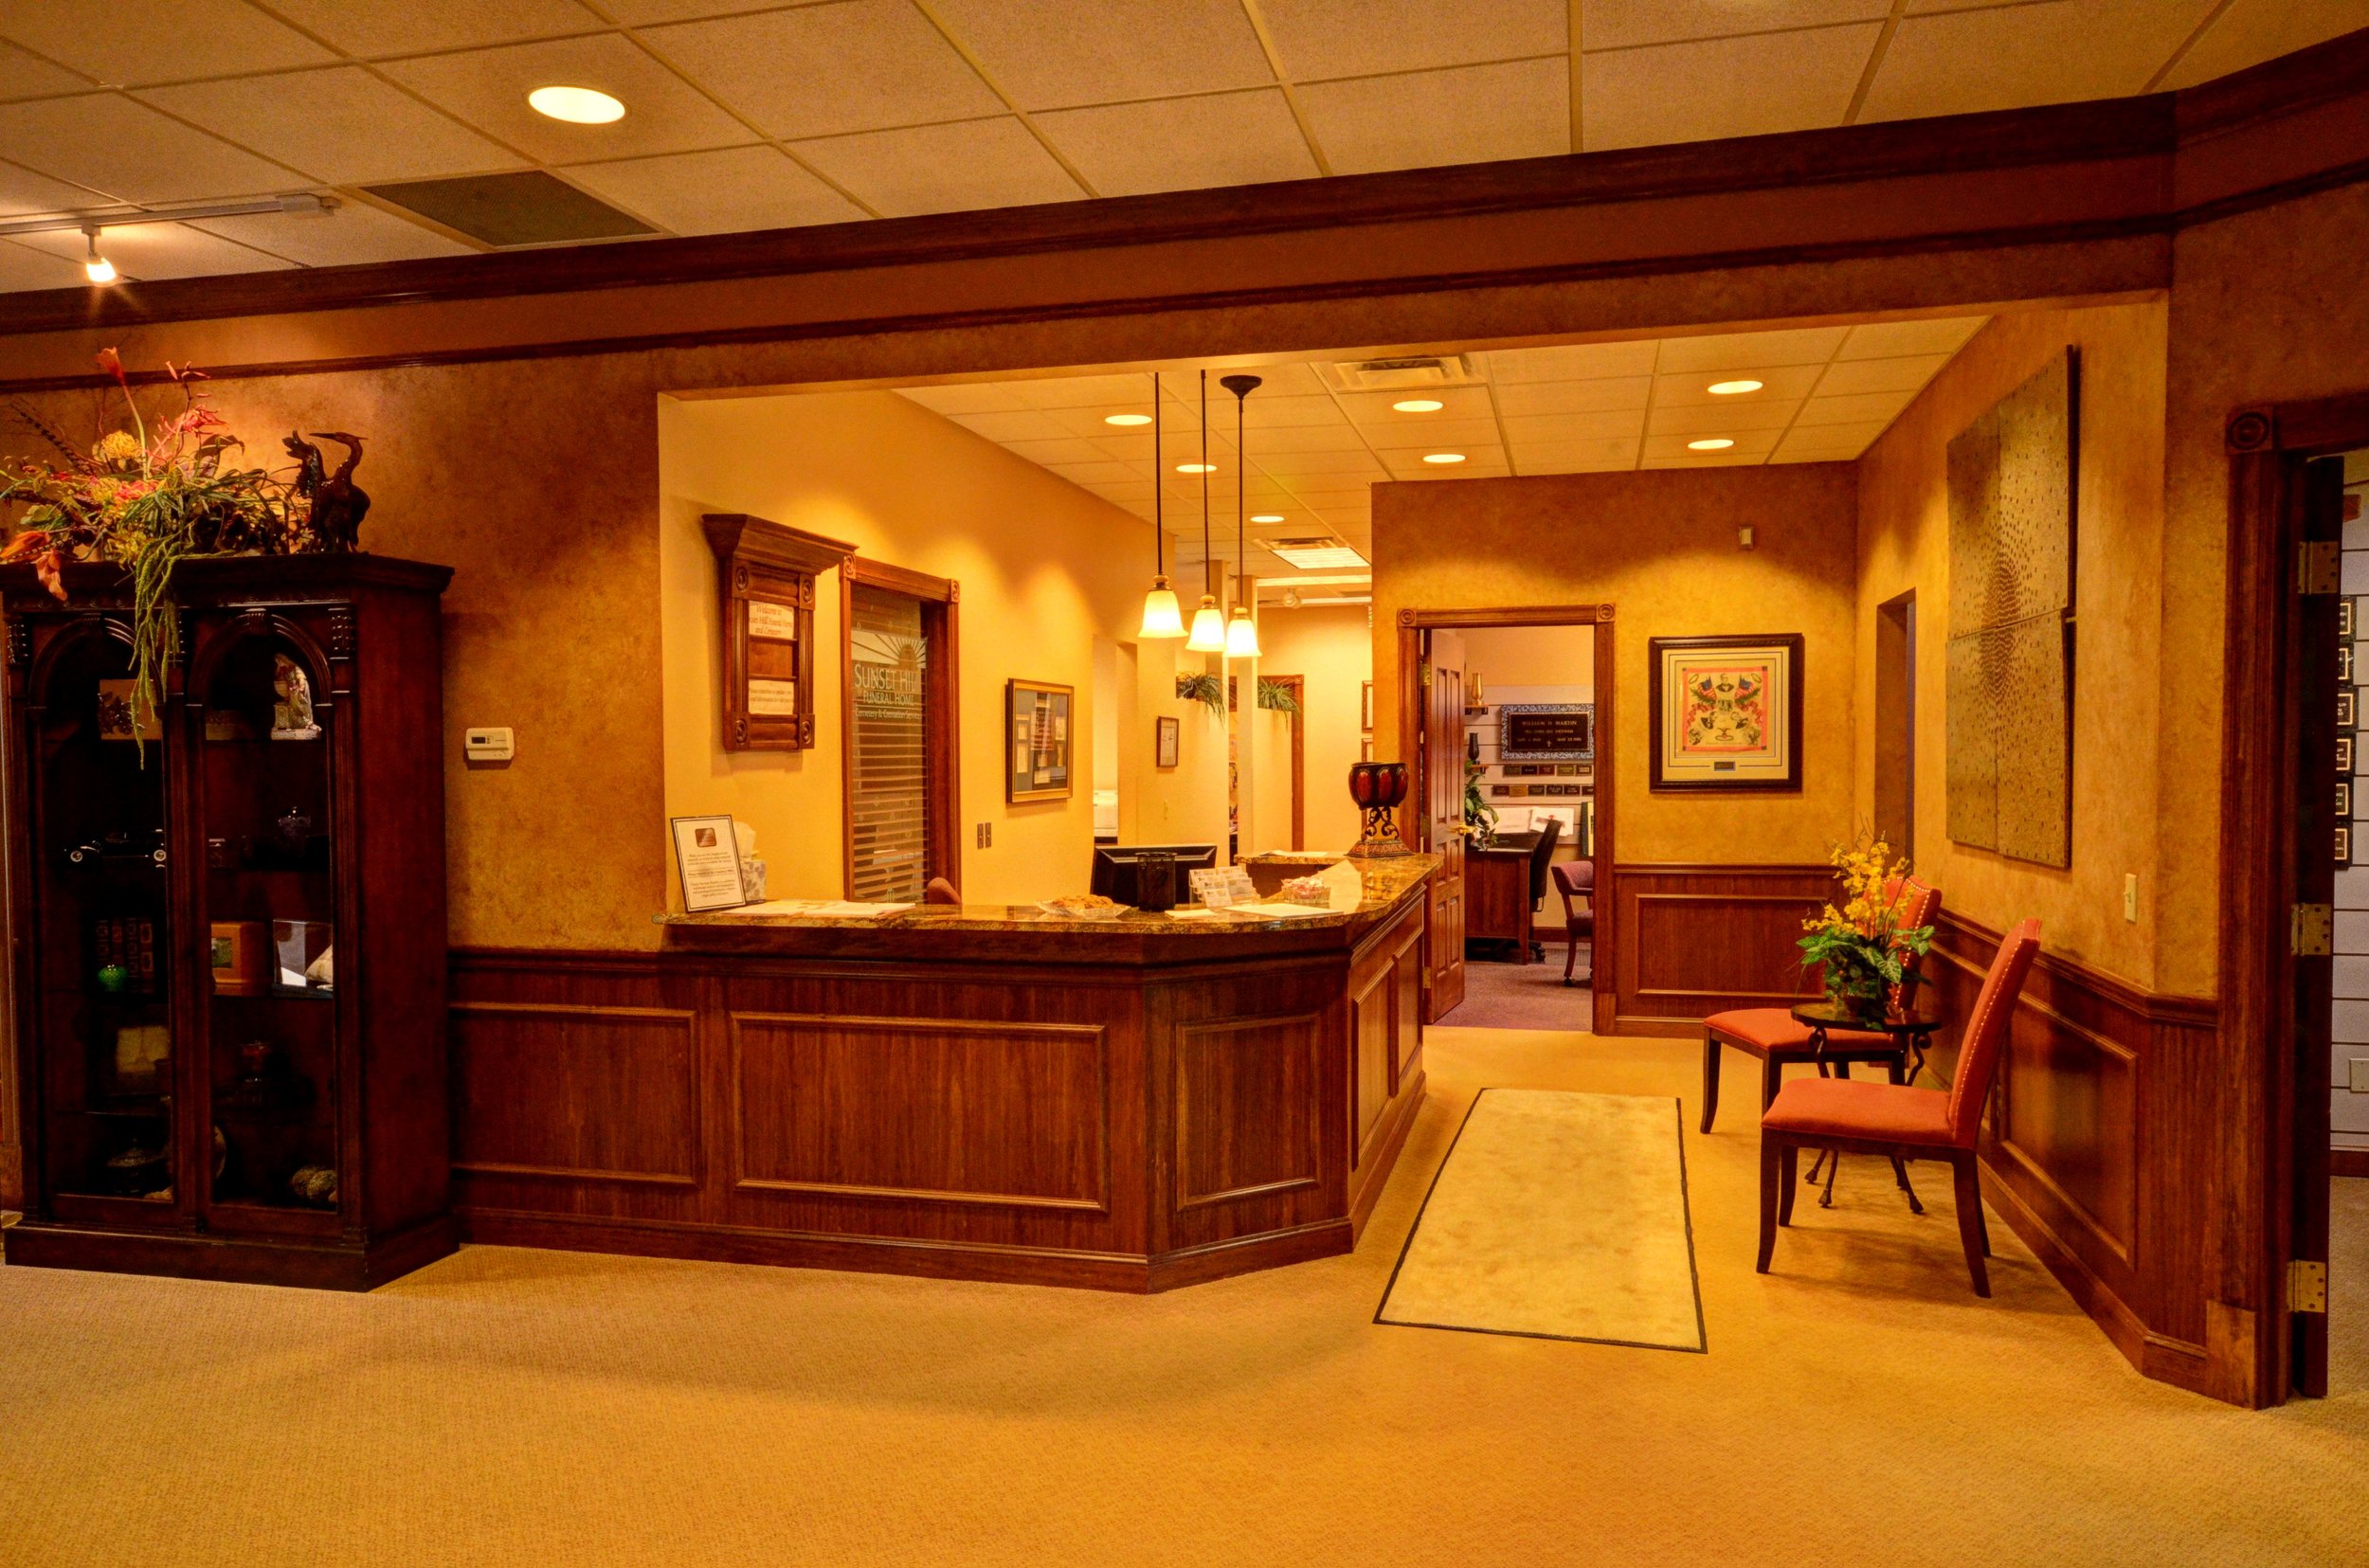 Sunset Hills Funeral Home Interior